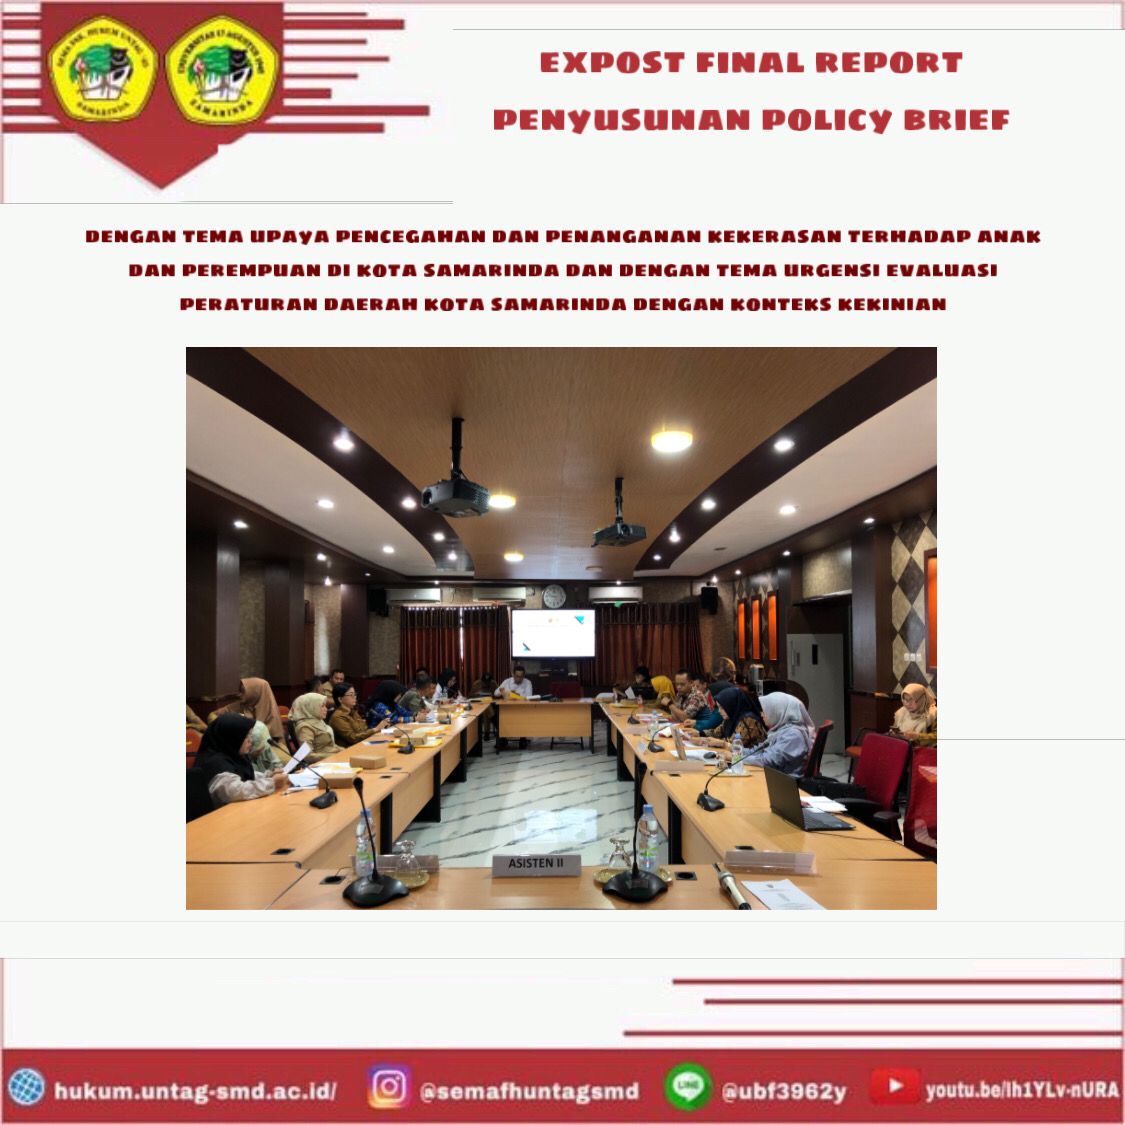 EXPOSE FINAL REPORT POLICY BRIEF